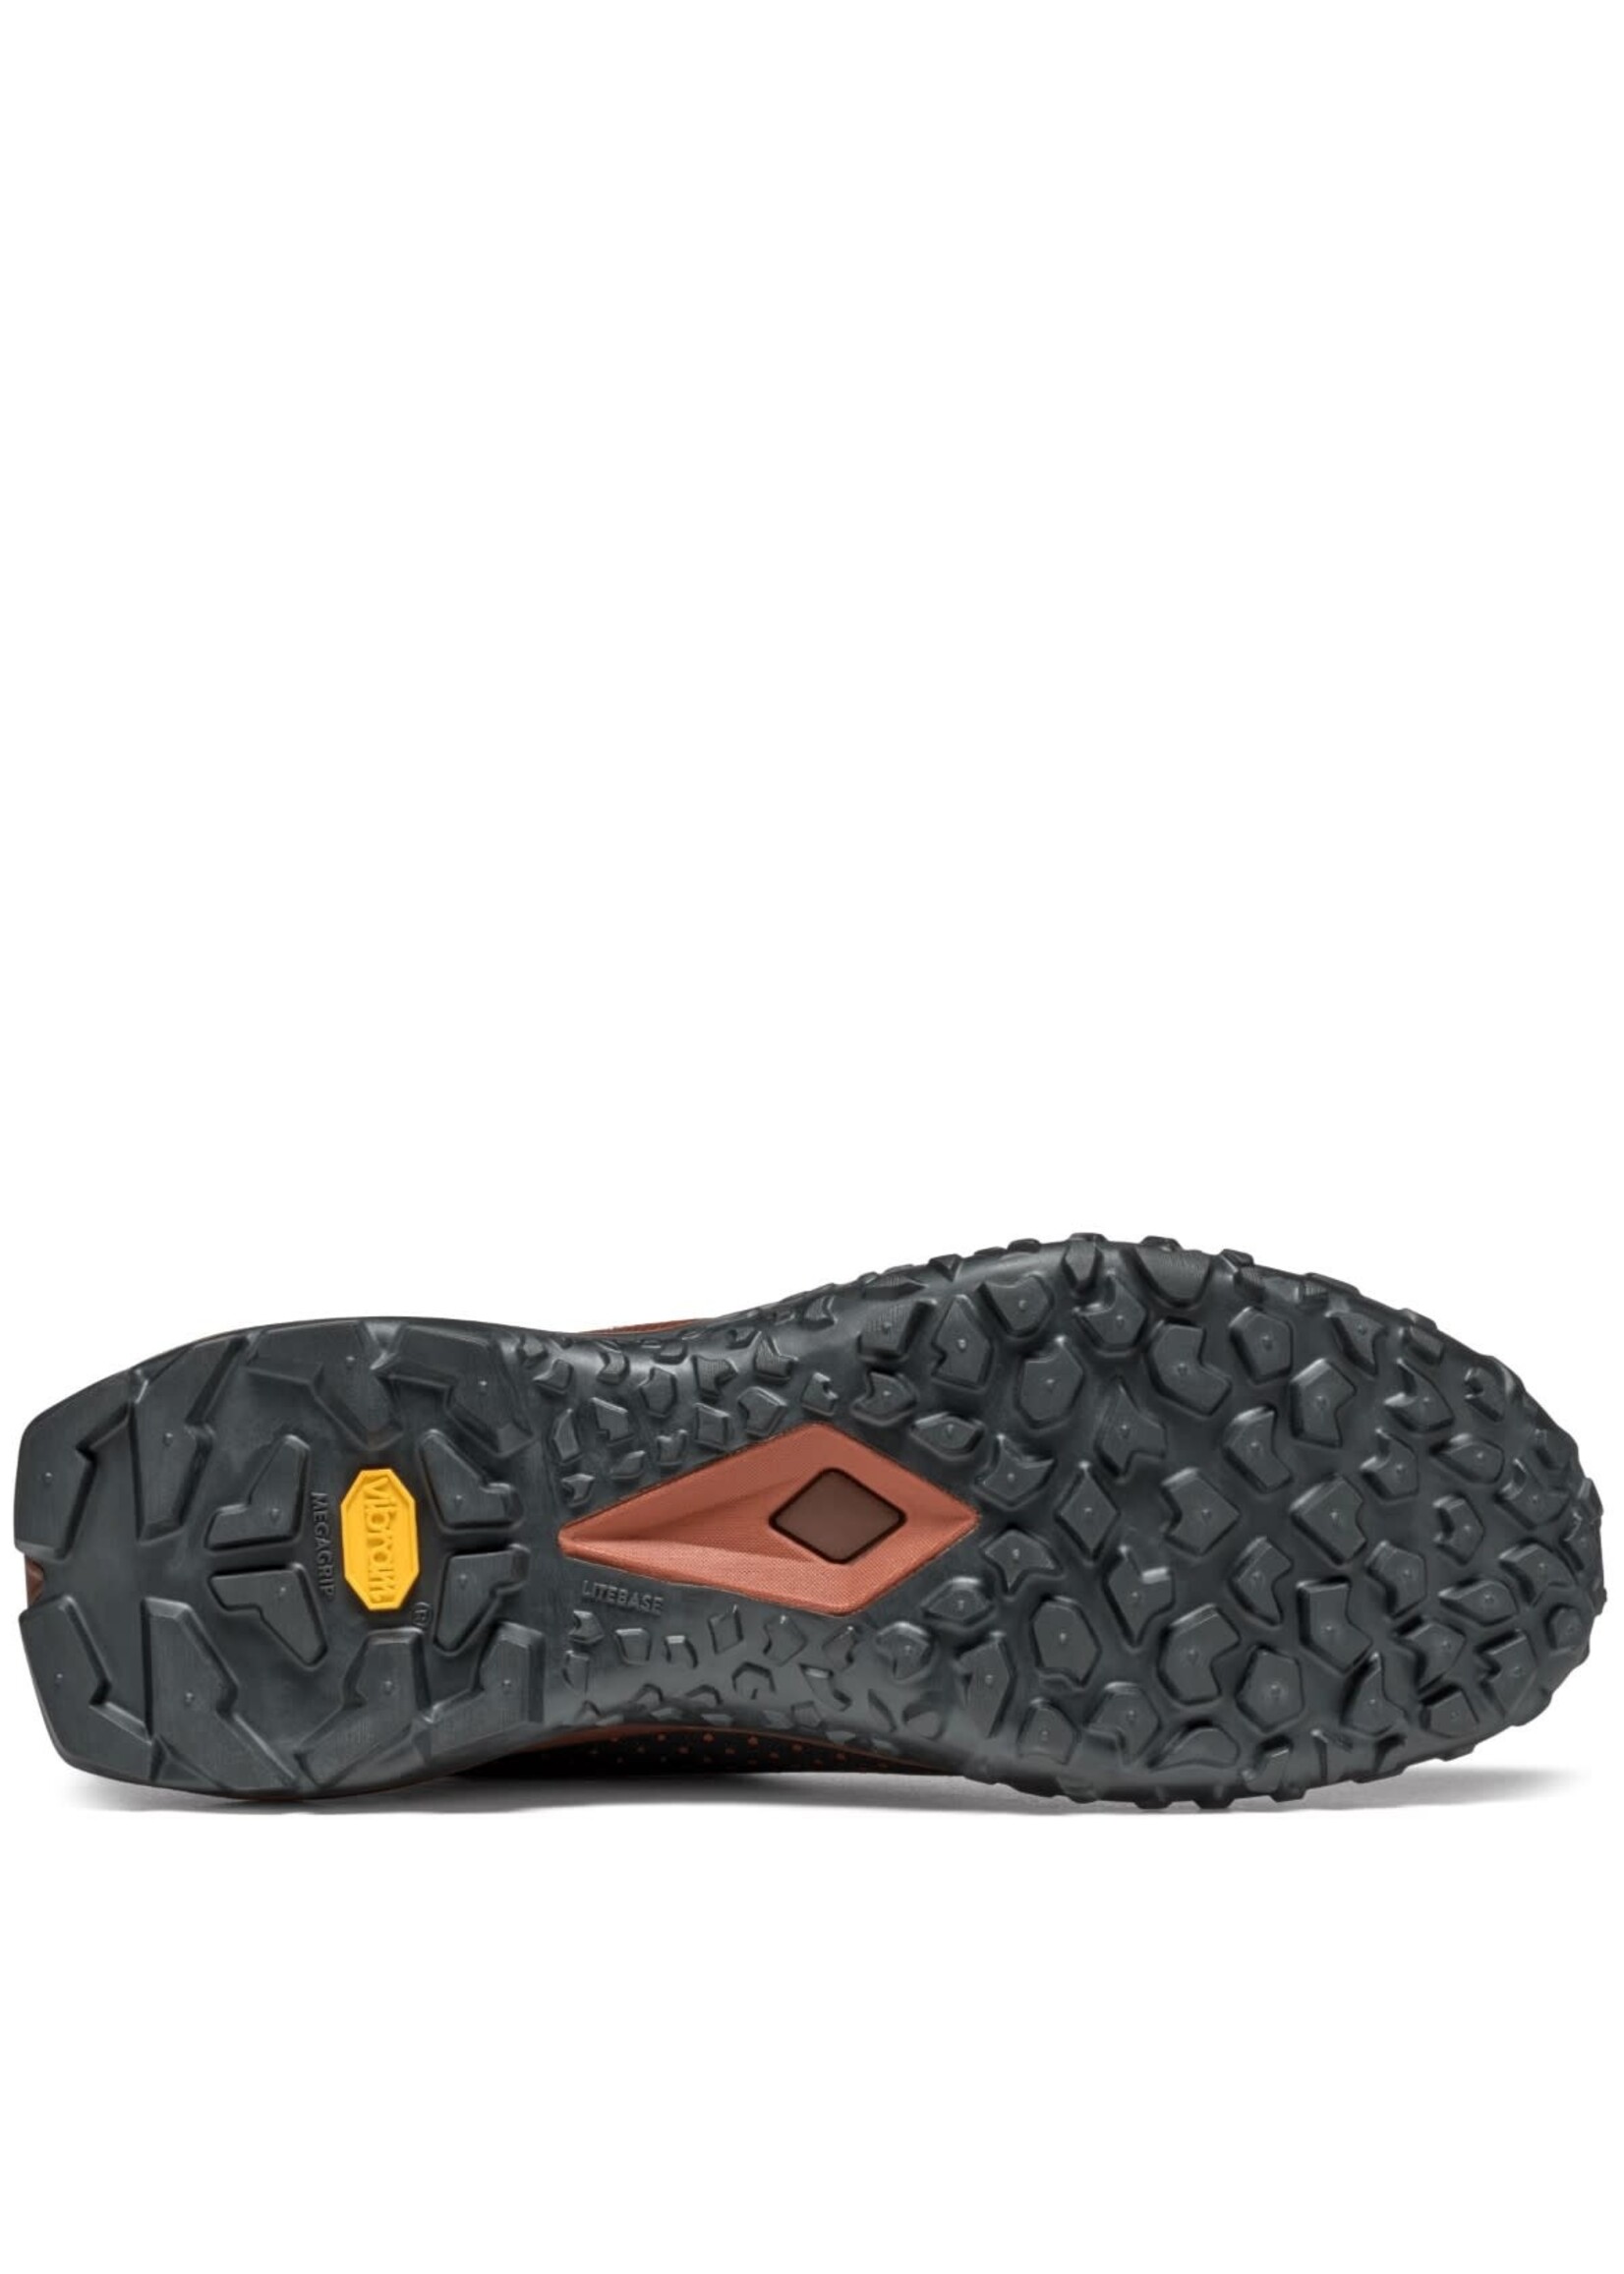 Tecnica Chaussure Tecnica Magma 2.0 S GTX - Homme